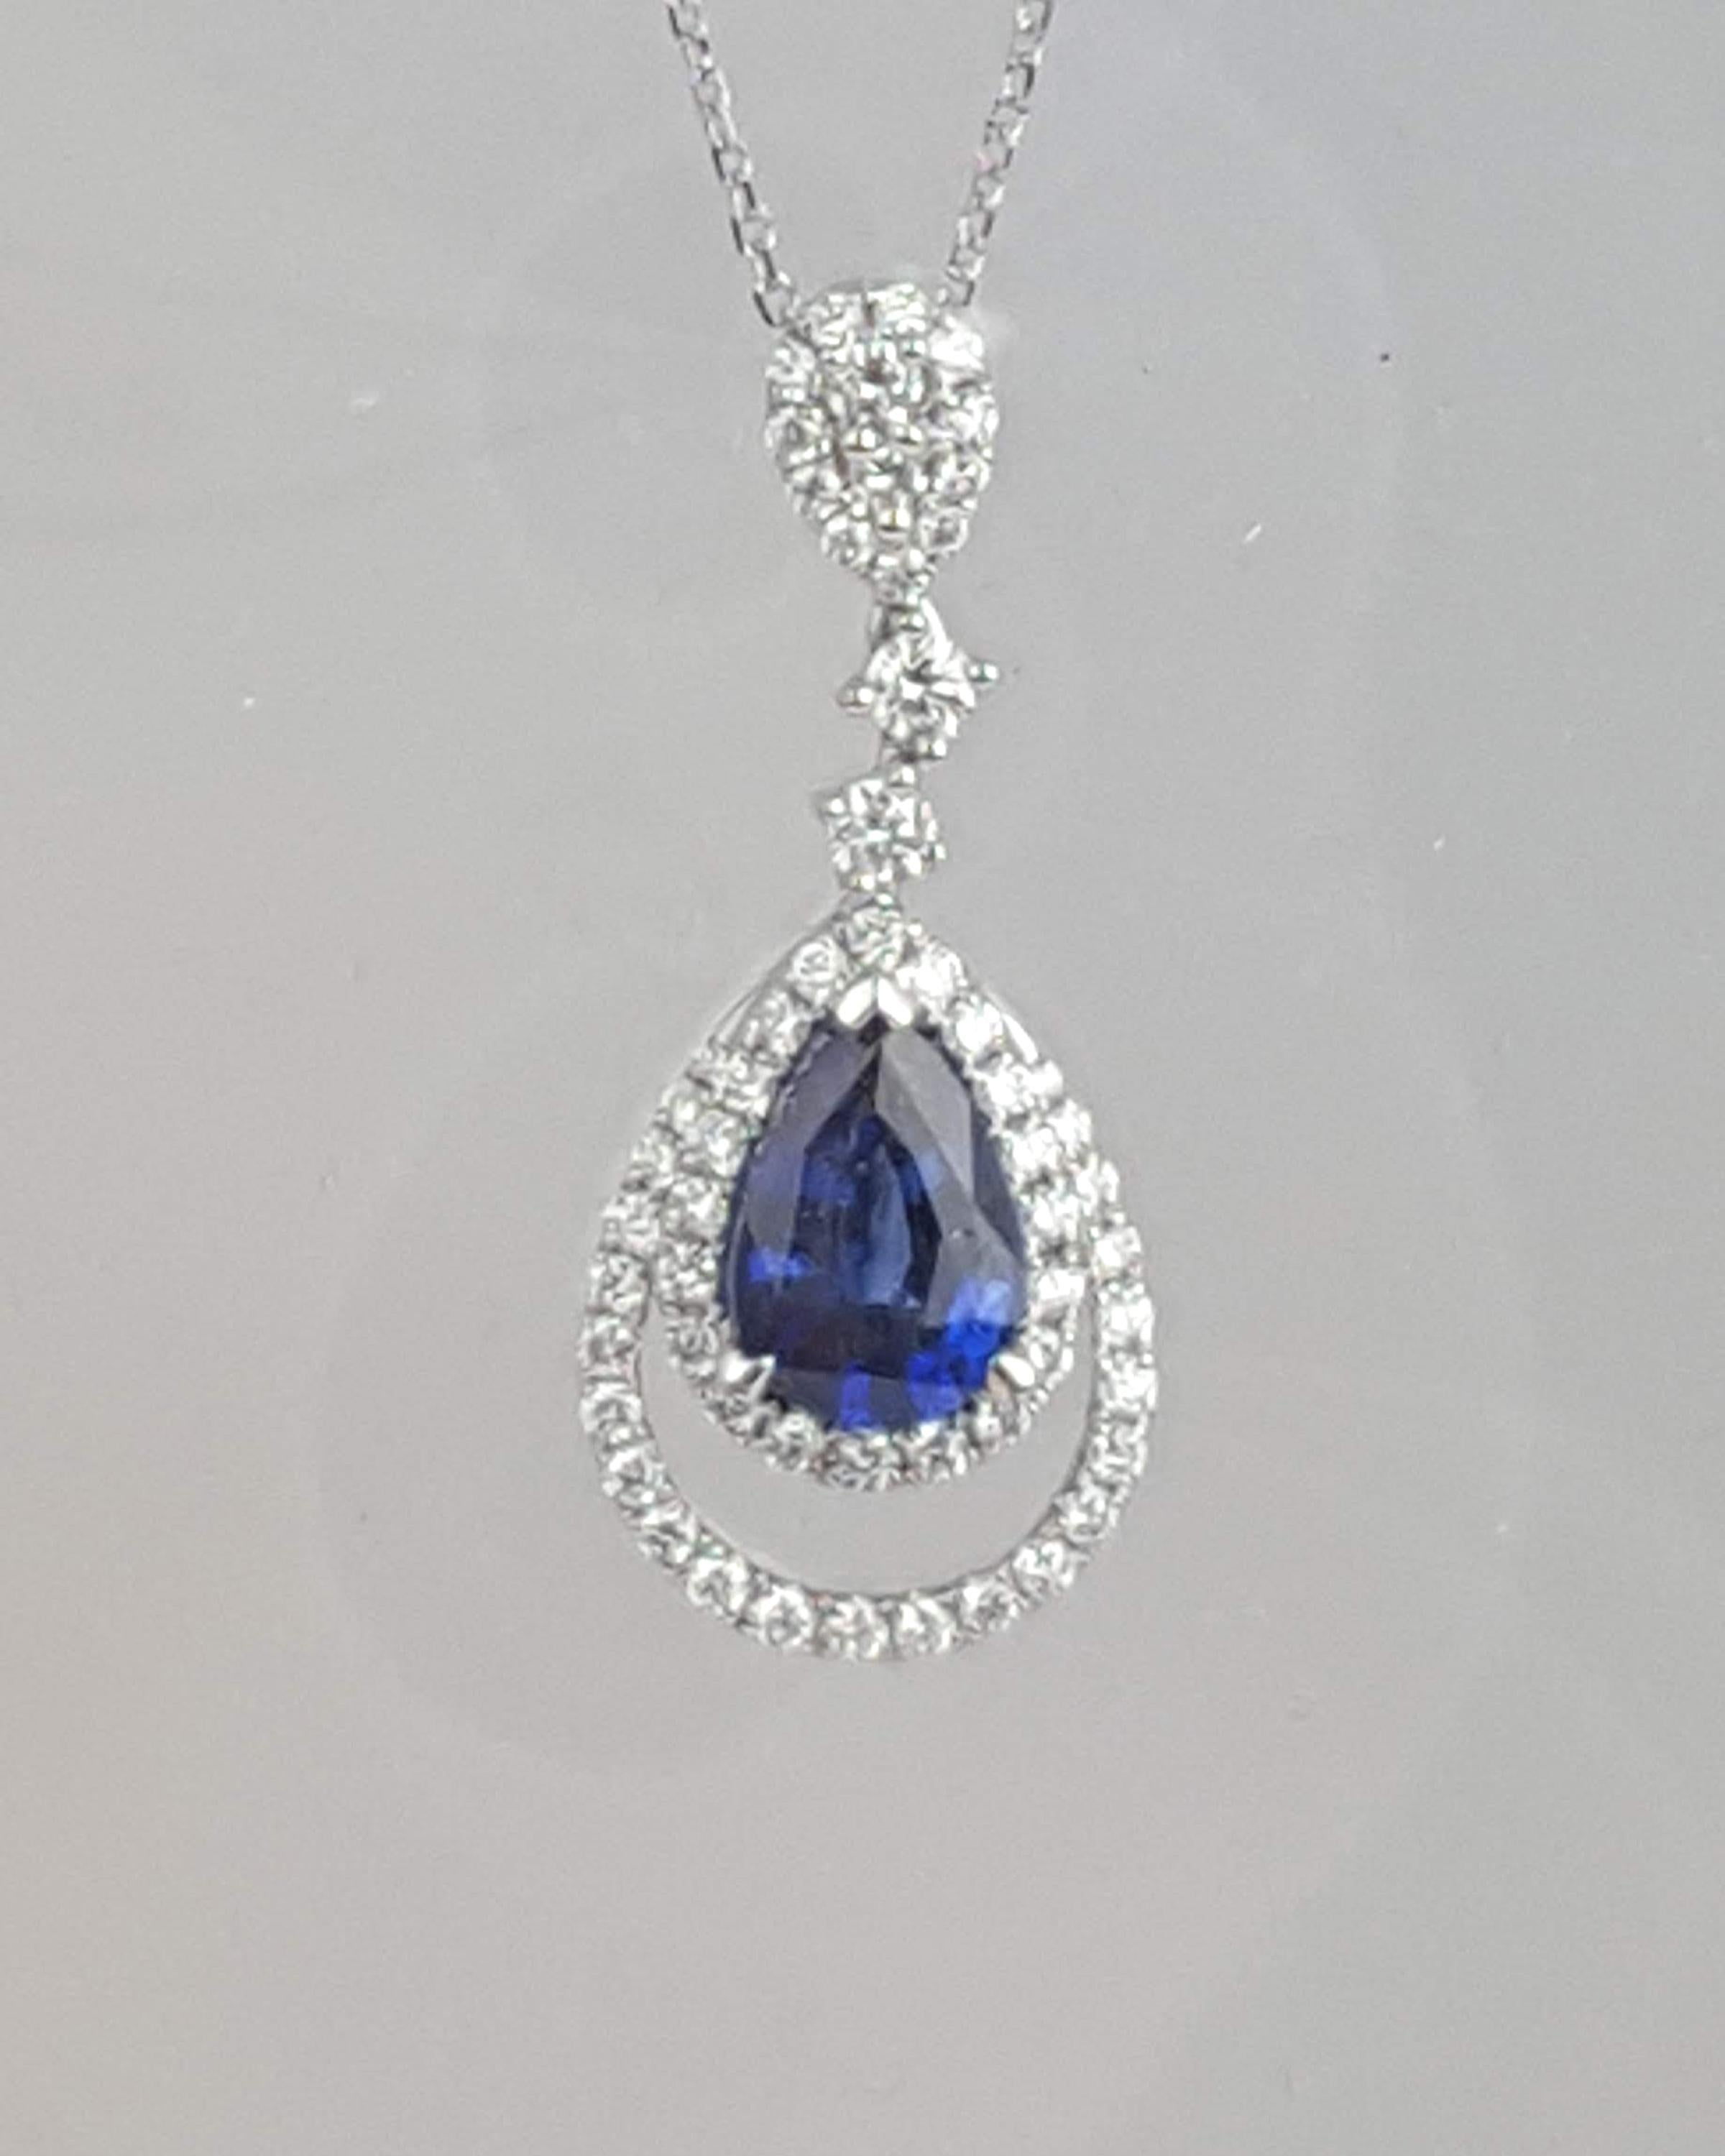 (DiamondTown) This sweet pendant features a 1.46 carat pear shape sapphire center, sitting inside an embellished double teardrop halo of round white diamonds. The body of the pendant dangles from two round white diamonds and a decorated